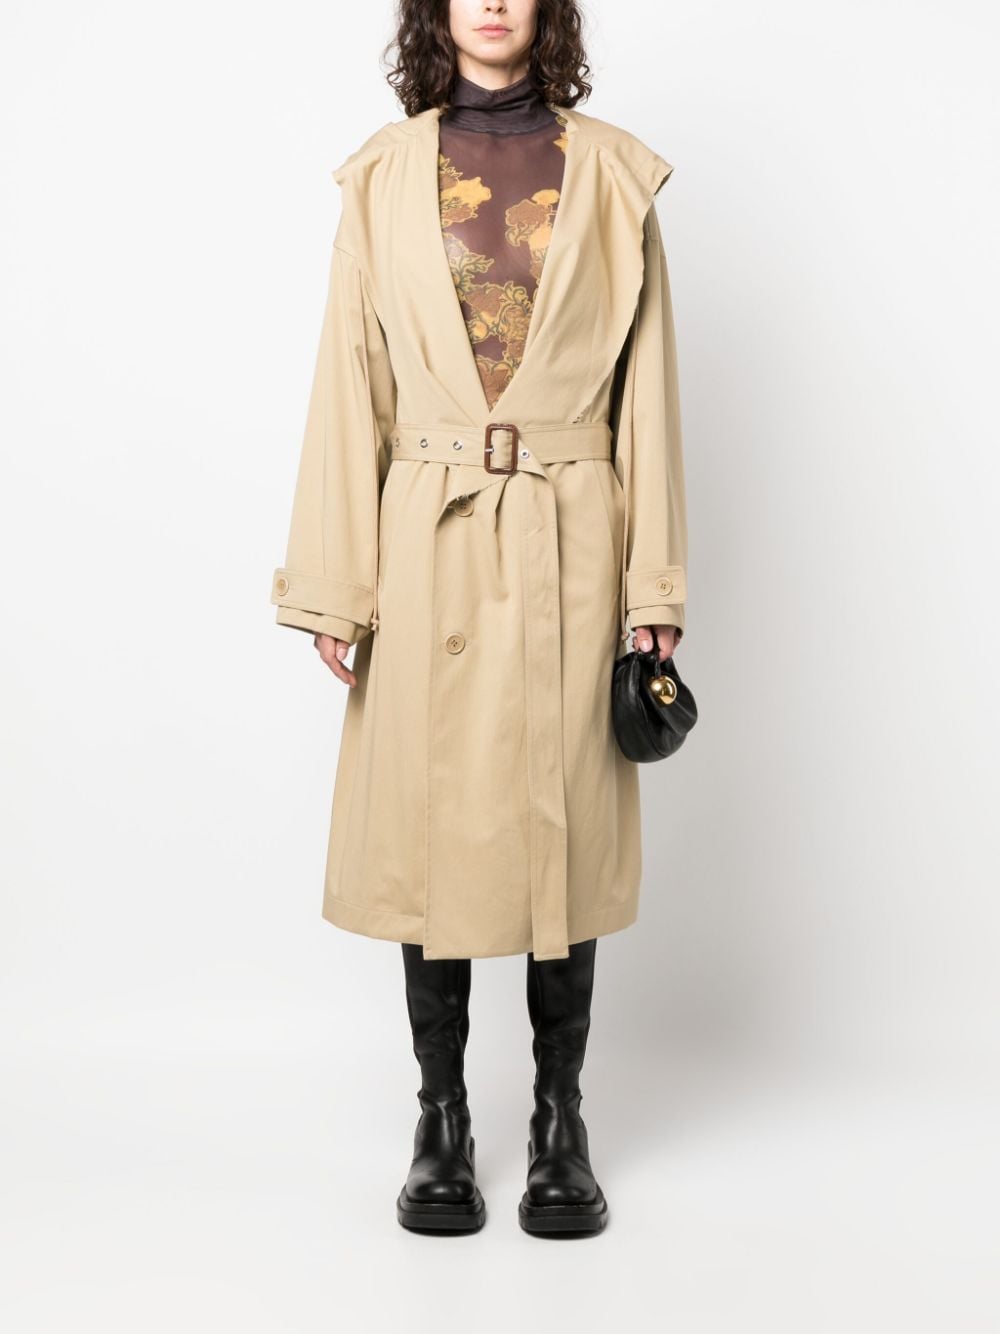 JW ANDERSON Classic Camel Hooded Jacket for Chic Women